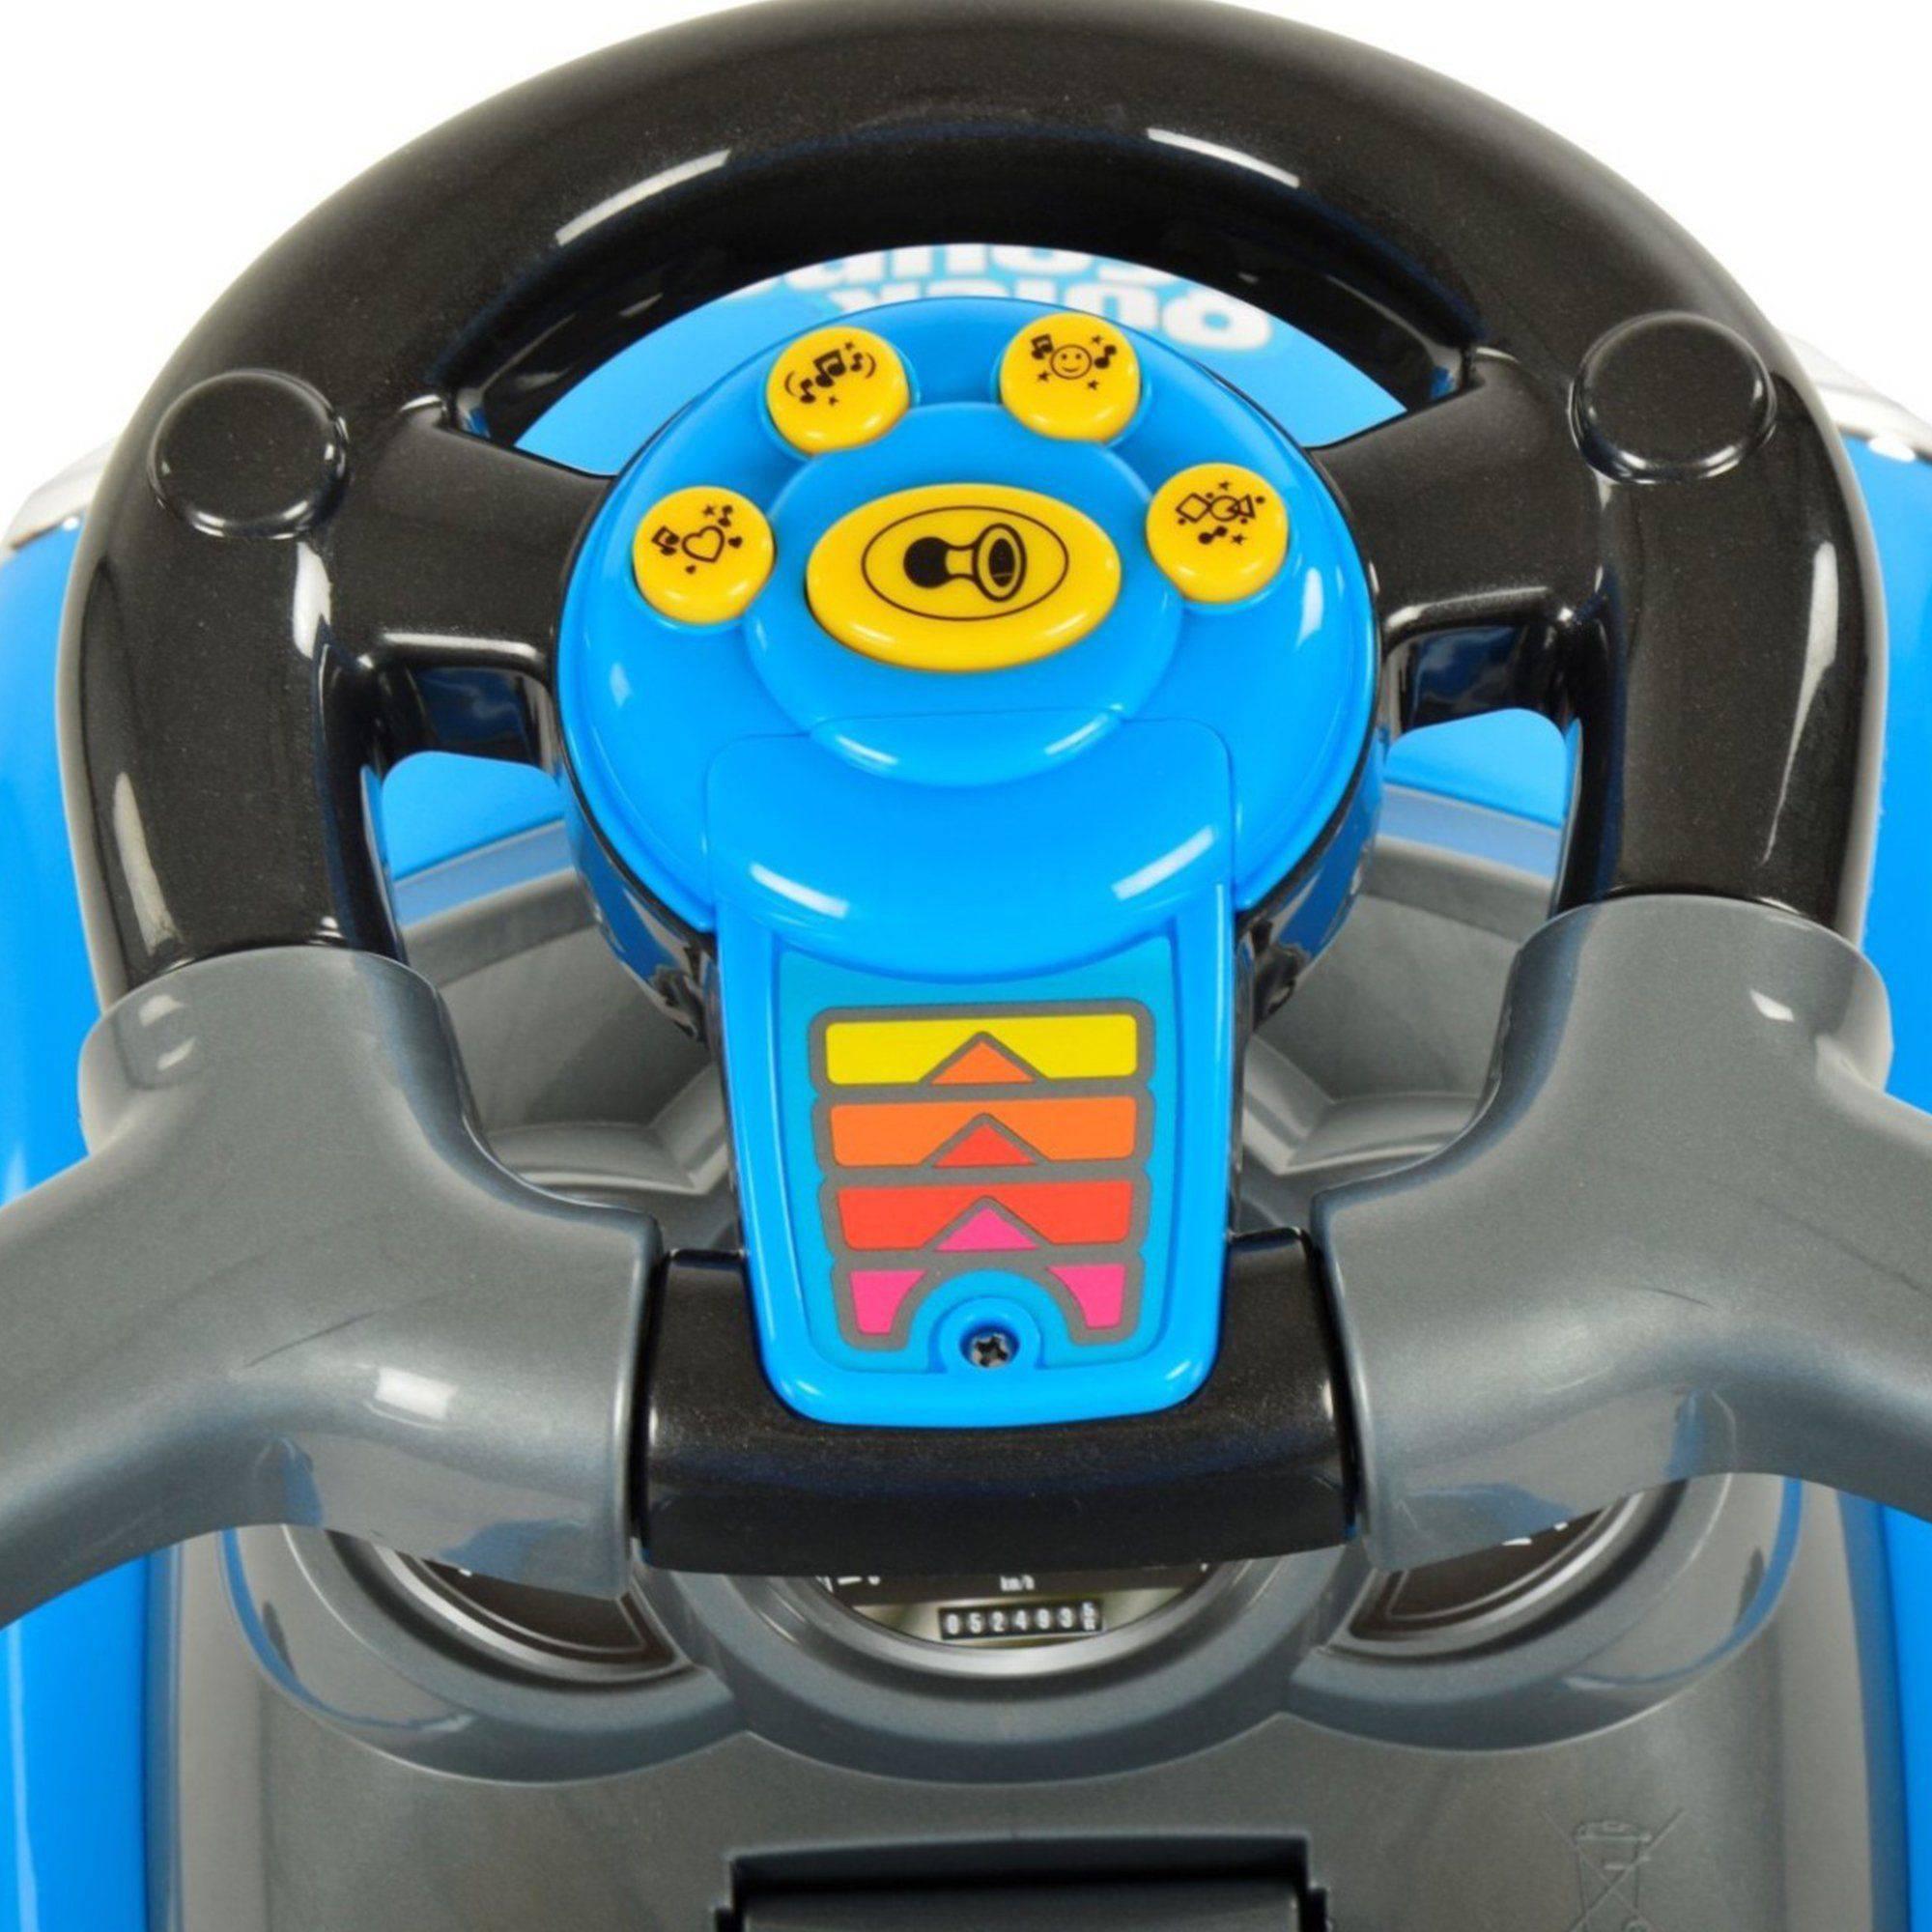 Freddo Toys Easy Wheel Quick Coupe 3 in 1, Stroller, Walker and Ride on - American Kids Cars